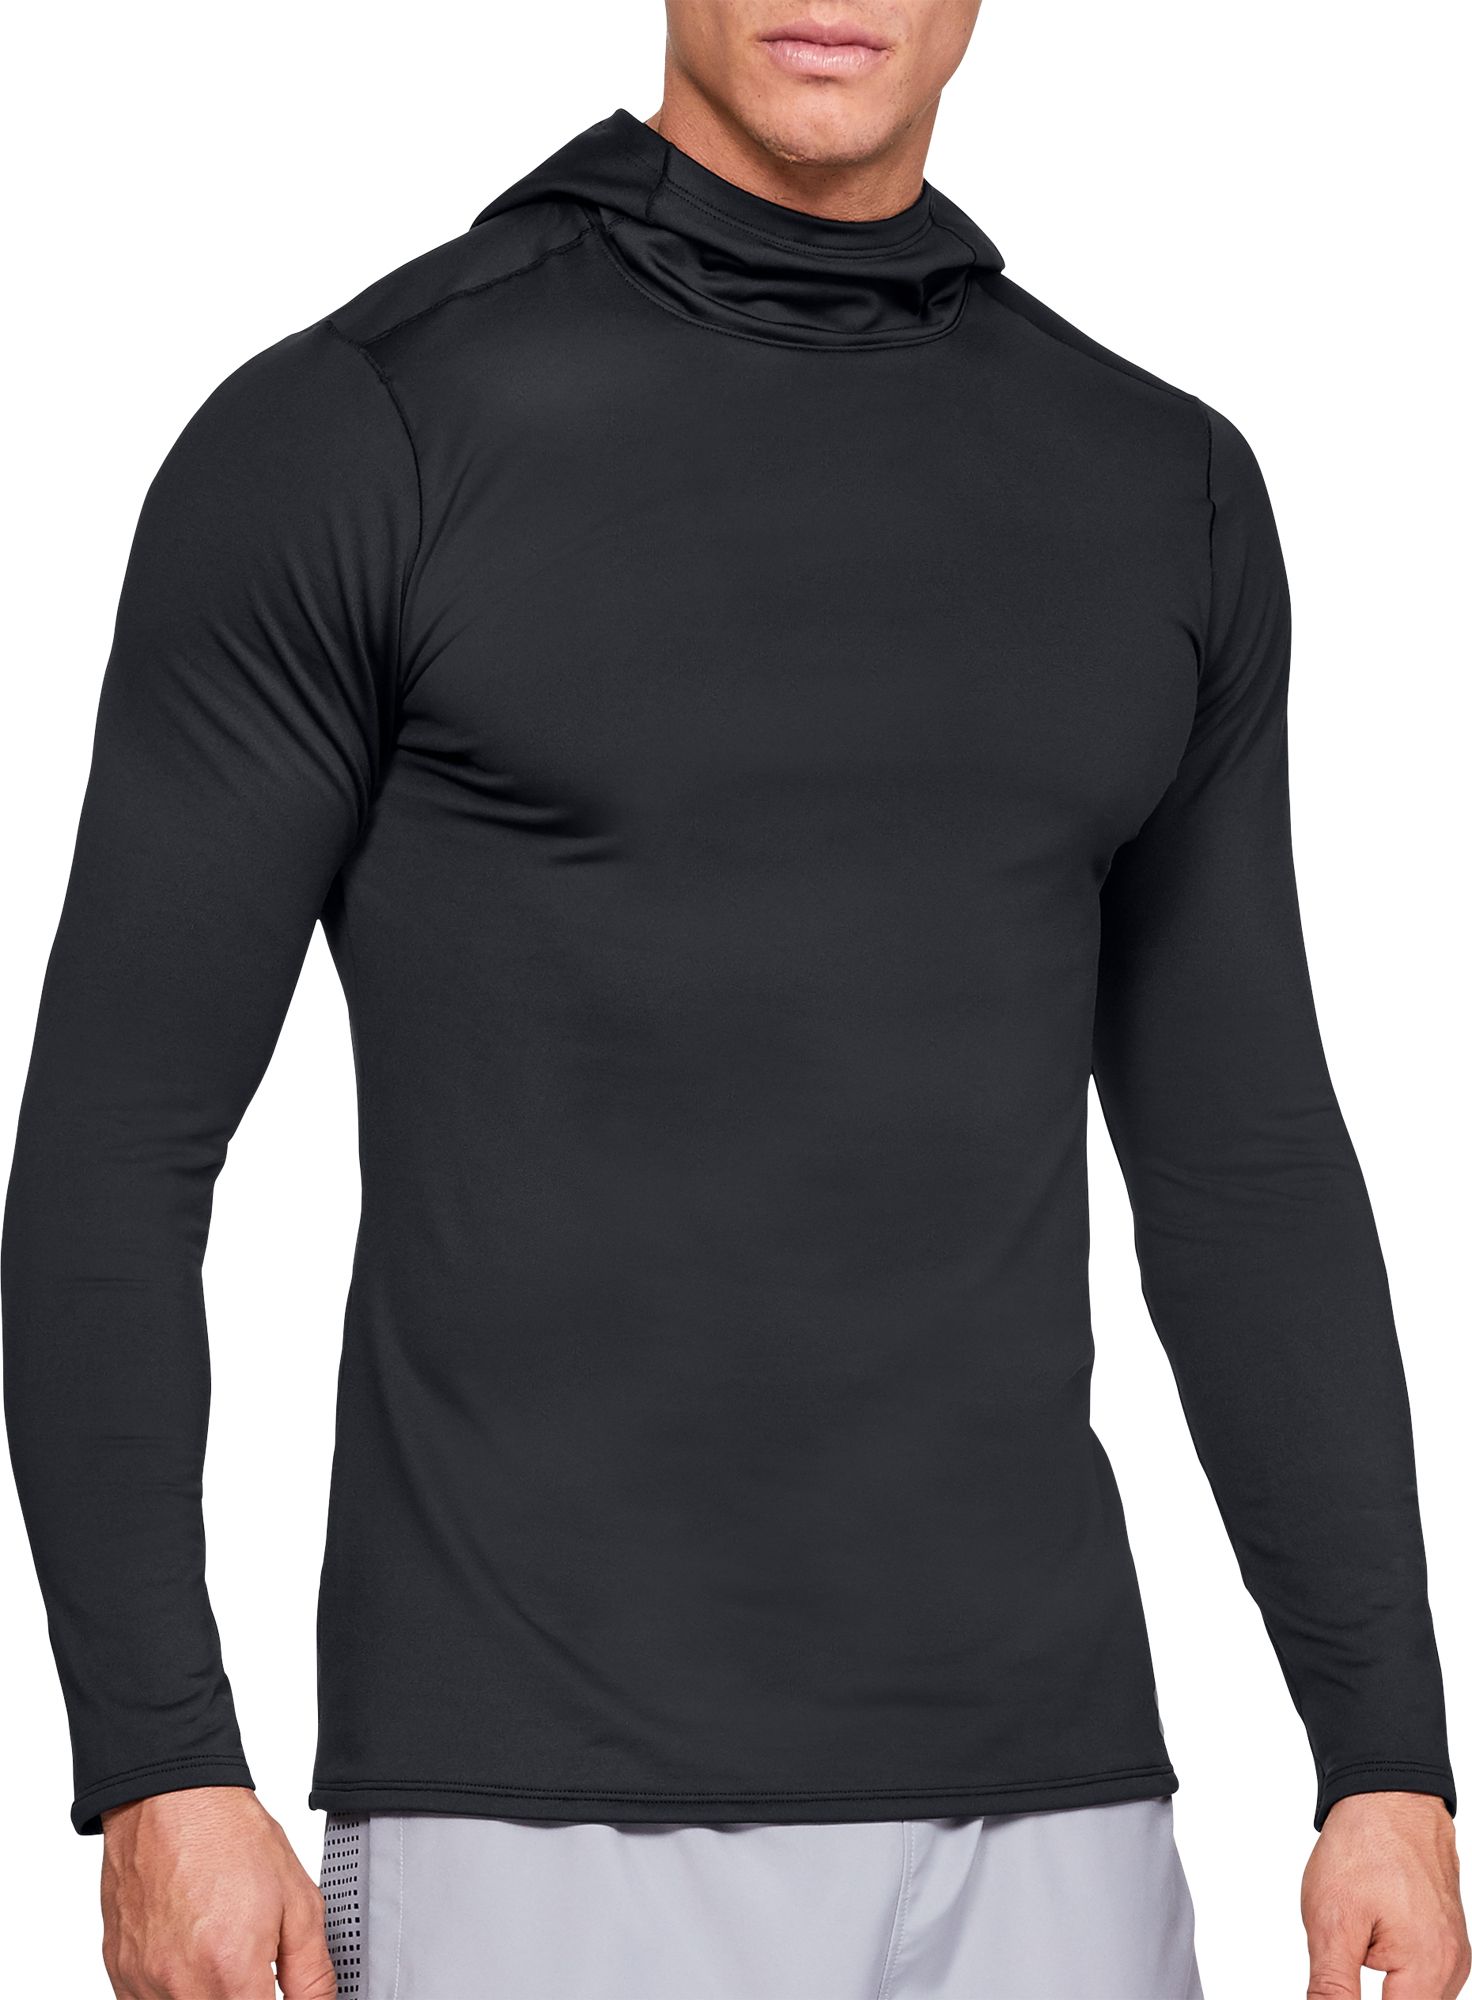 under armor fitted shirts